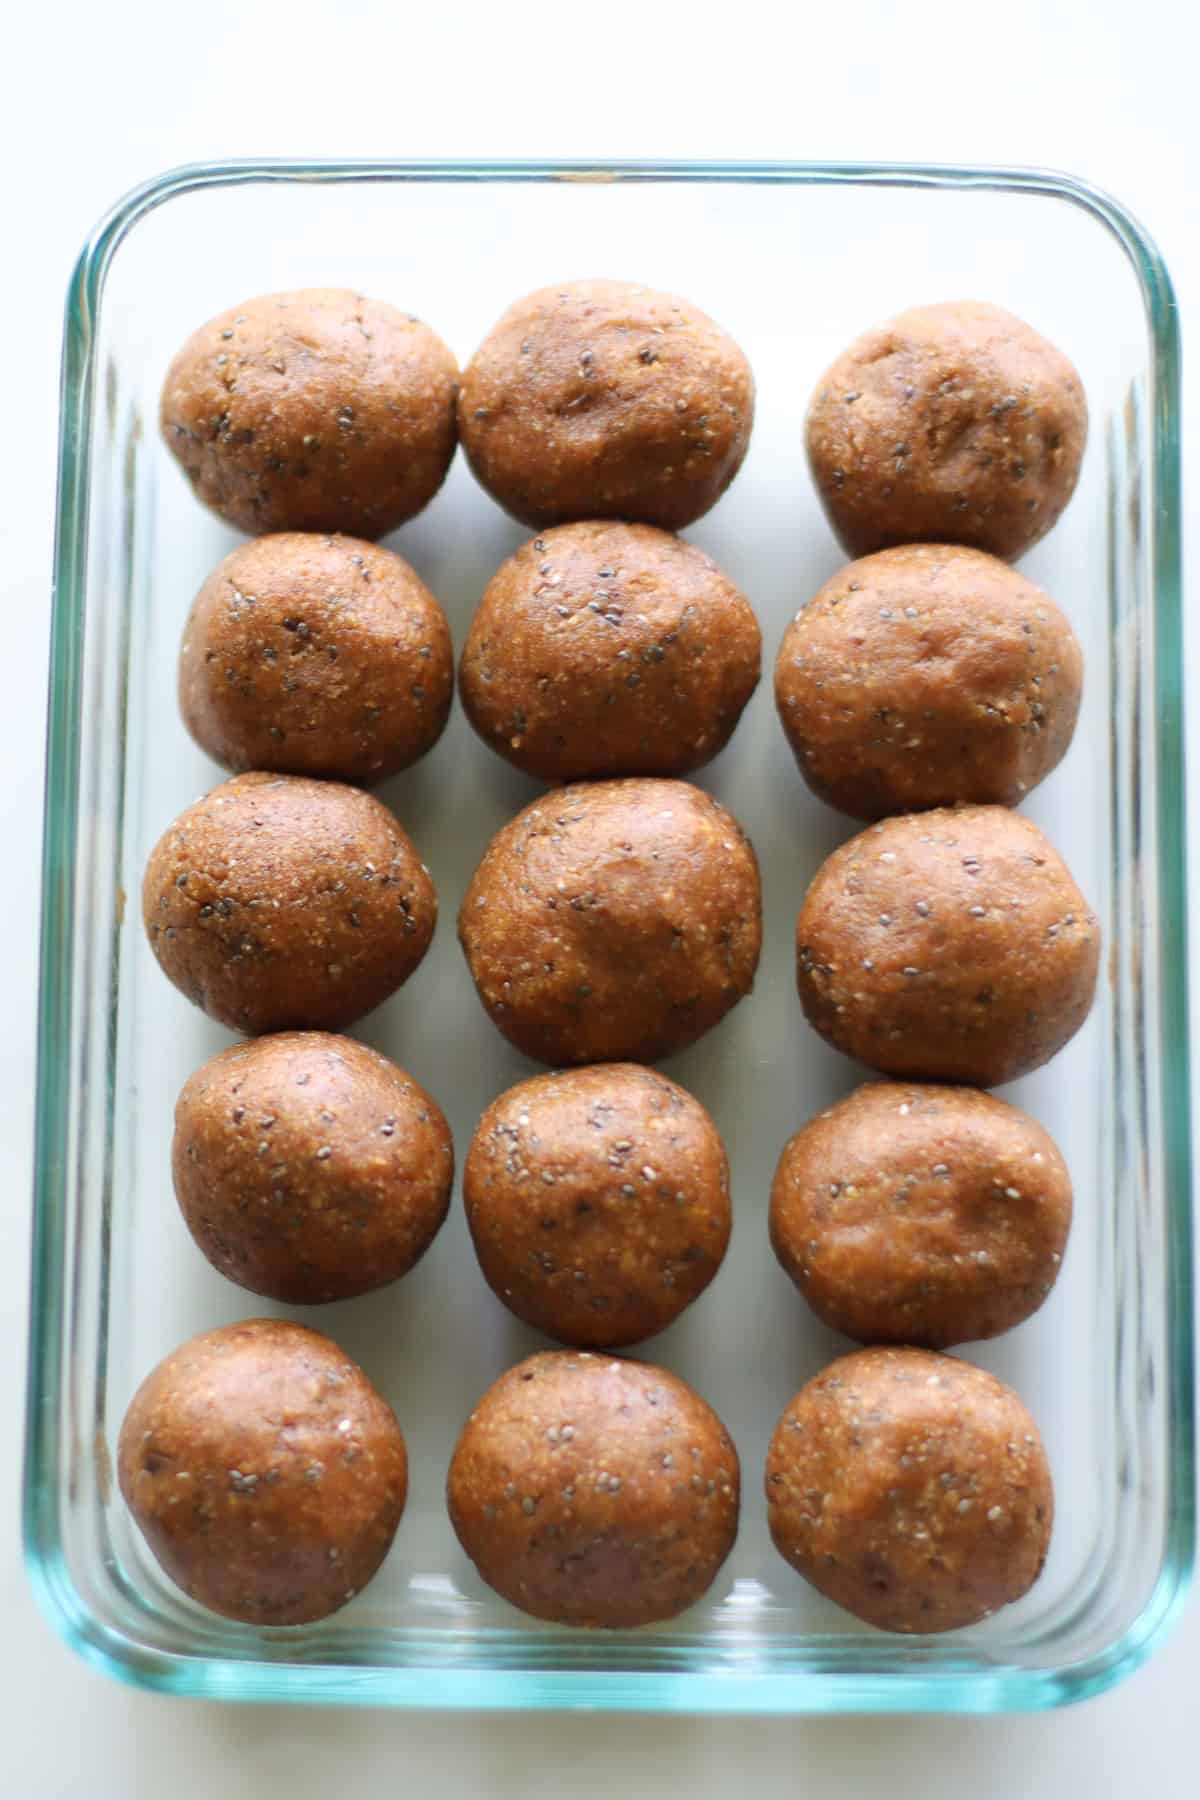 Shaped balls in a glass container.